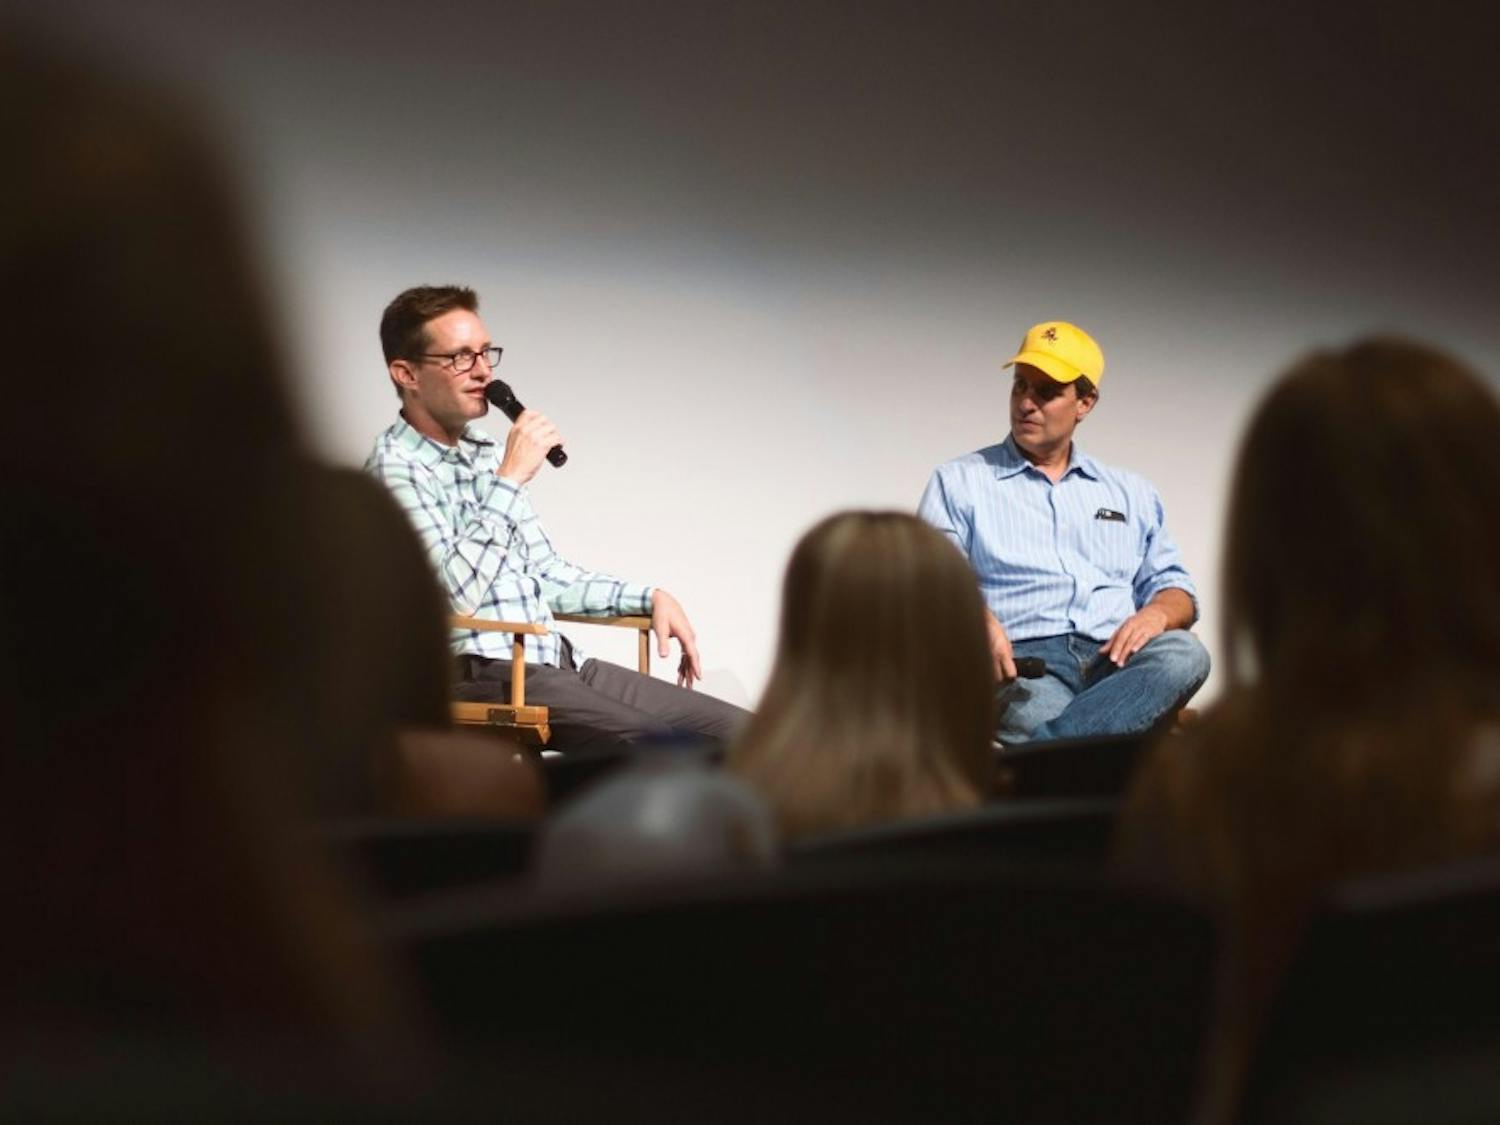 "American Dad!" Co-Creator Mike Barker&nbsp;(left) and Adam Collis&nbsp;(right) answer questions from a Q&A session with ASU Students at the Marston Theater on Wednesday, Sept. 13.